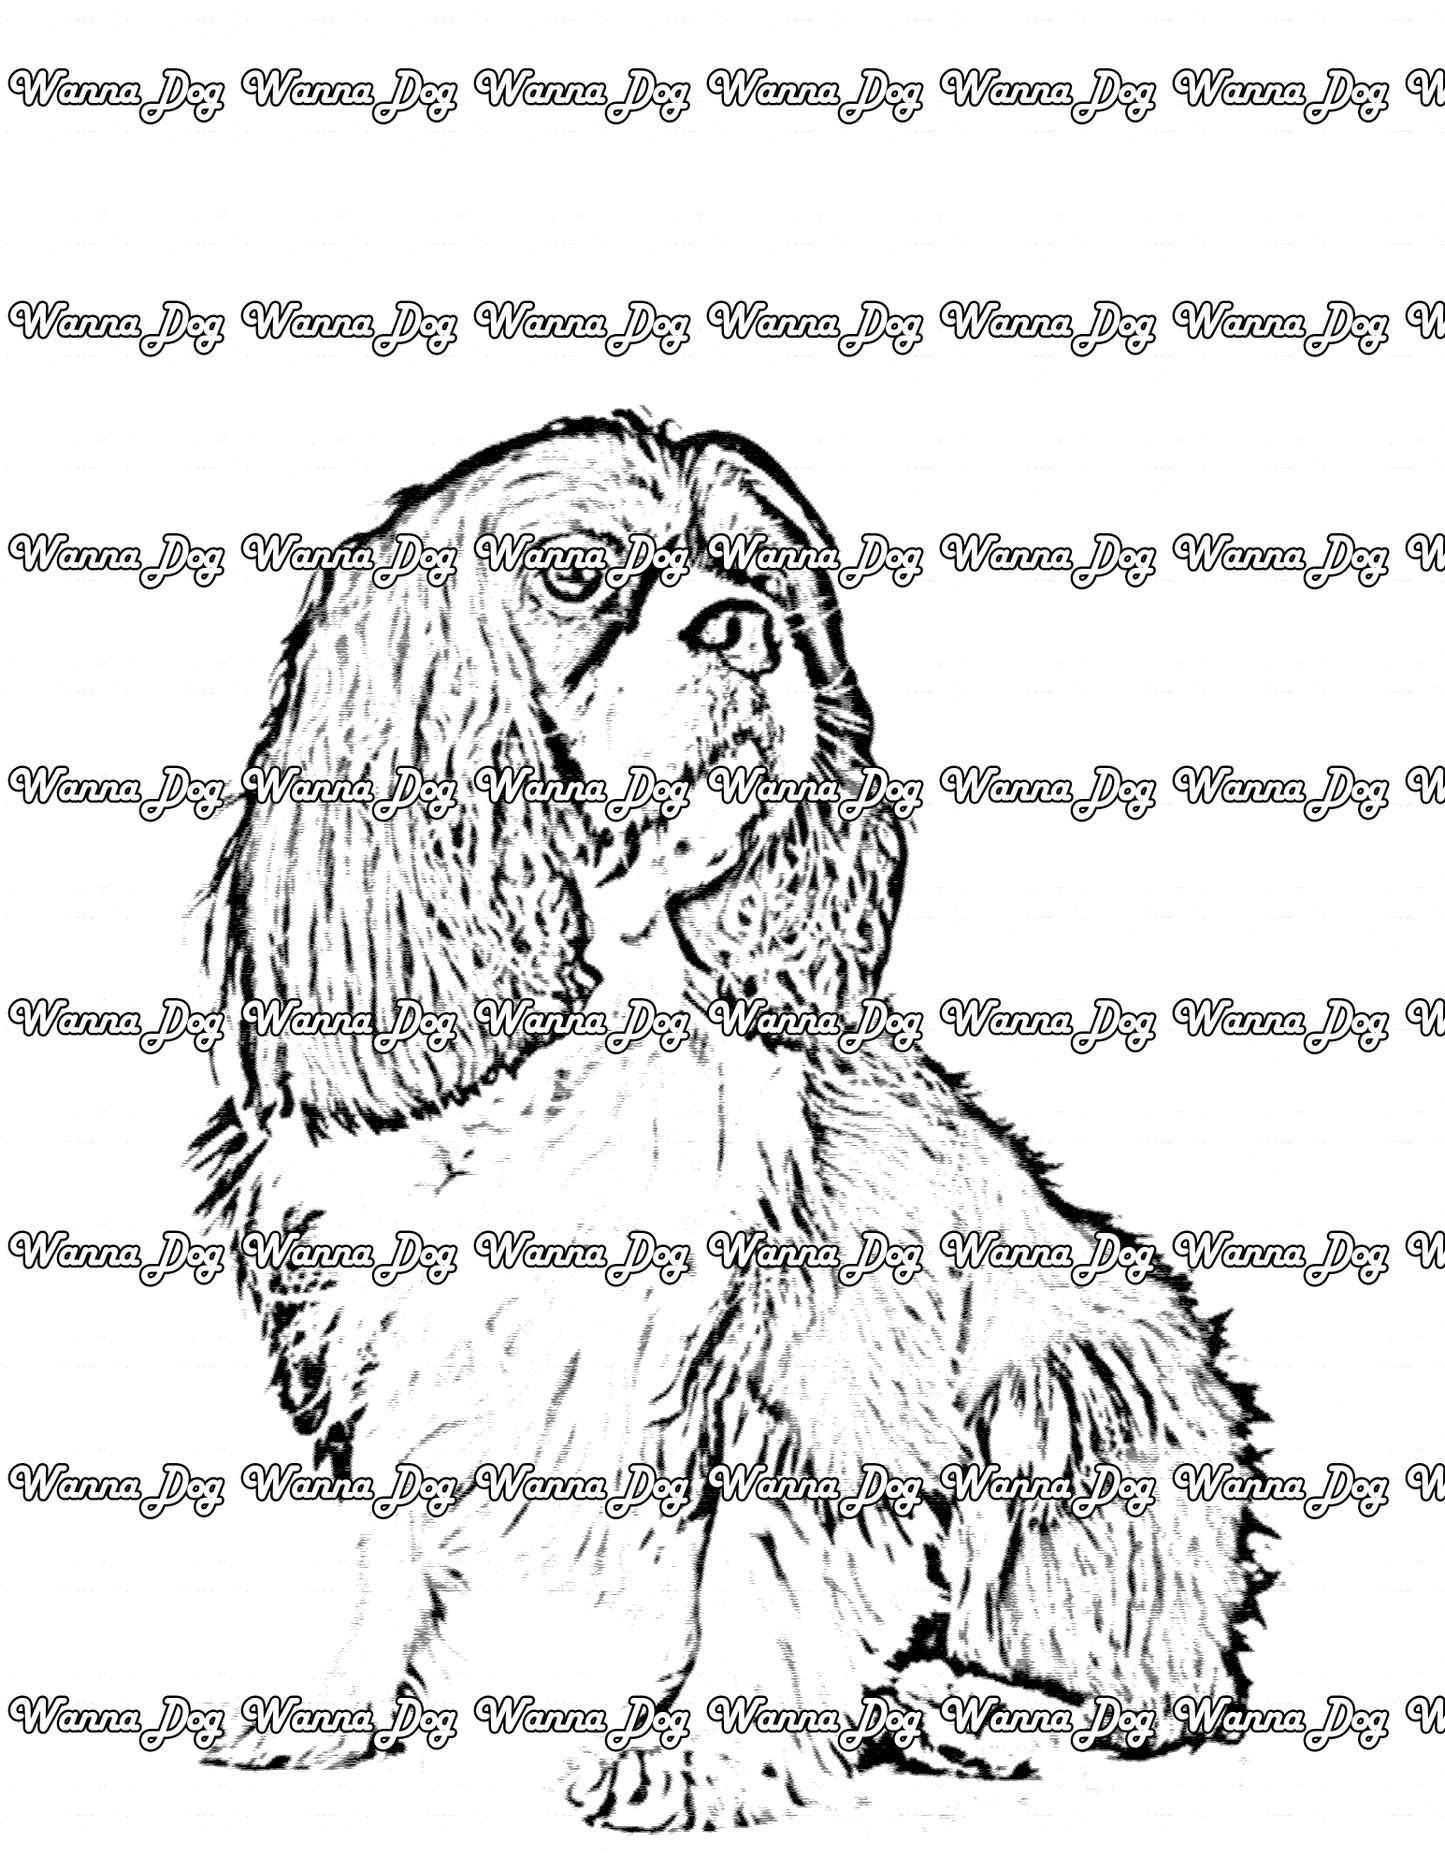 Cavalier King Charles Spaniel Coloring Page of a Cavalier King Charles Spaniel sitting and looking away from the camera